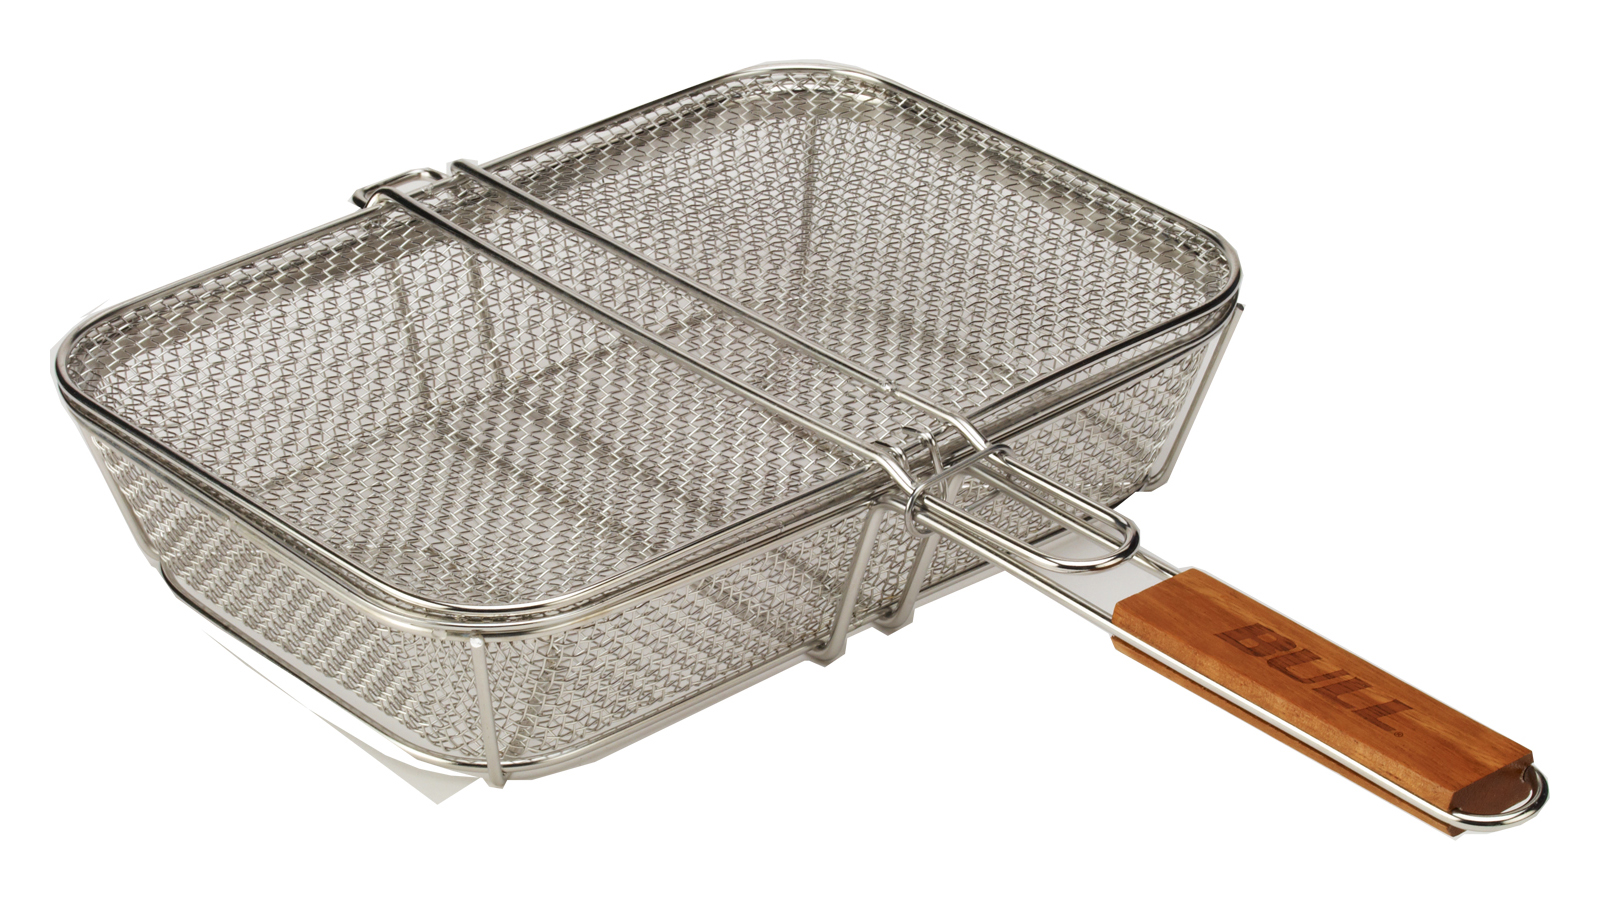 BULL Stainless Wire Mesh Shaker Basket with Lid